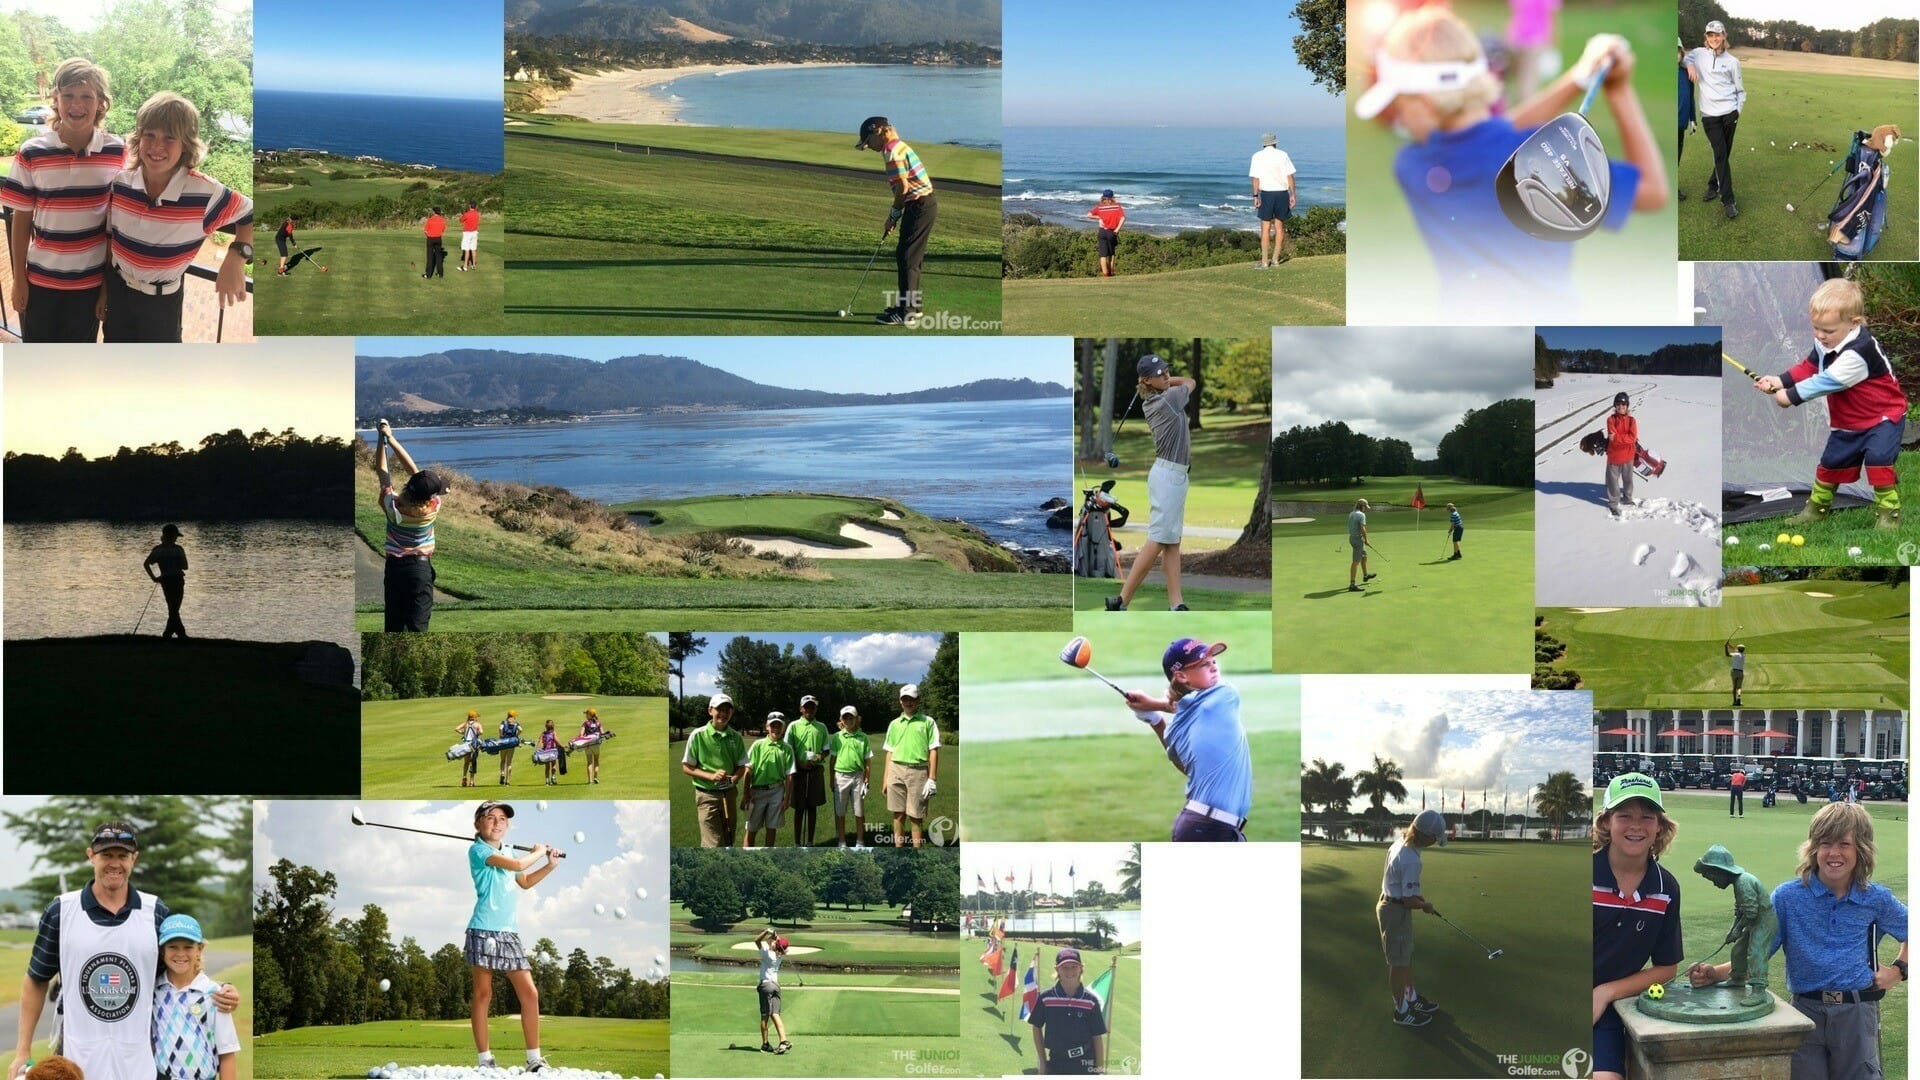 The Junior Golfer Home Page Collage